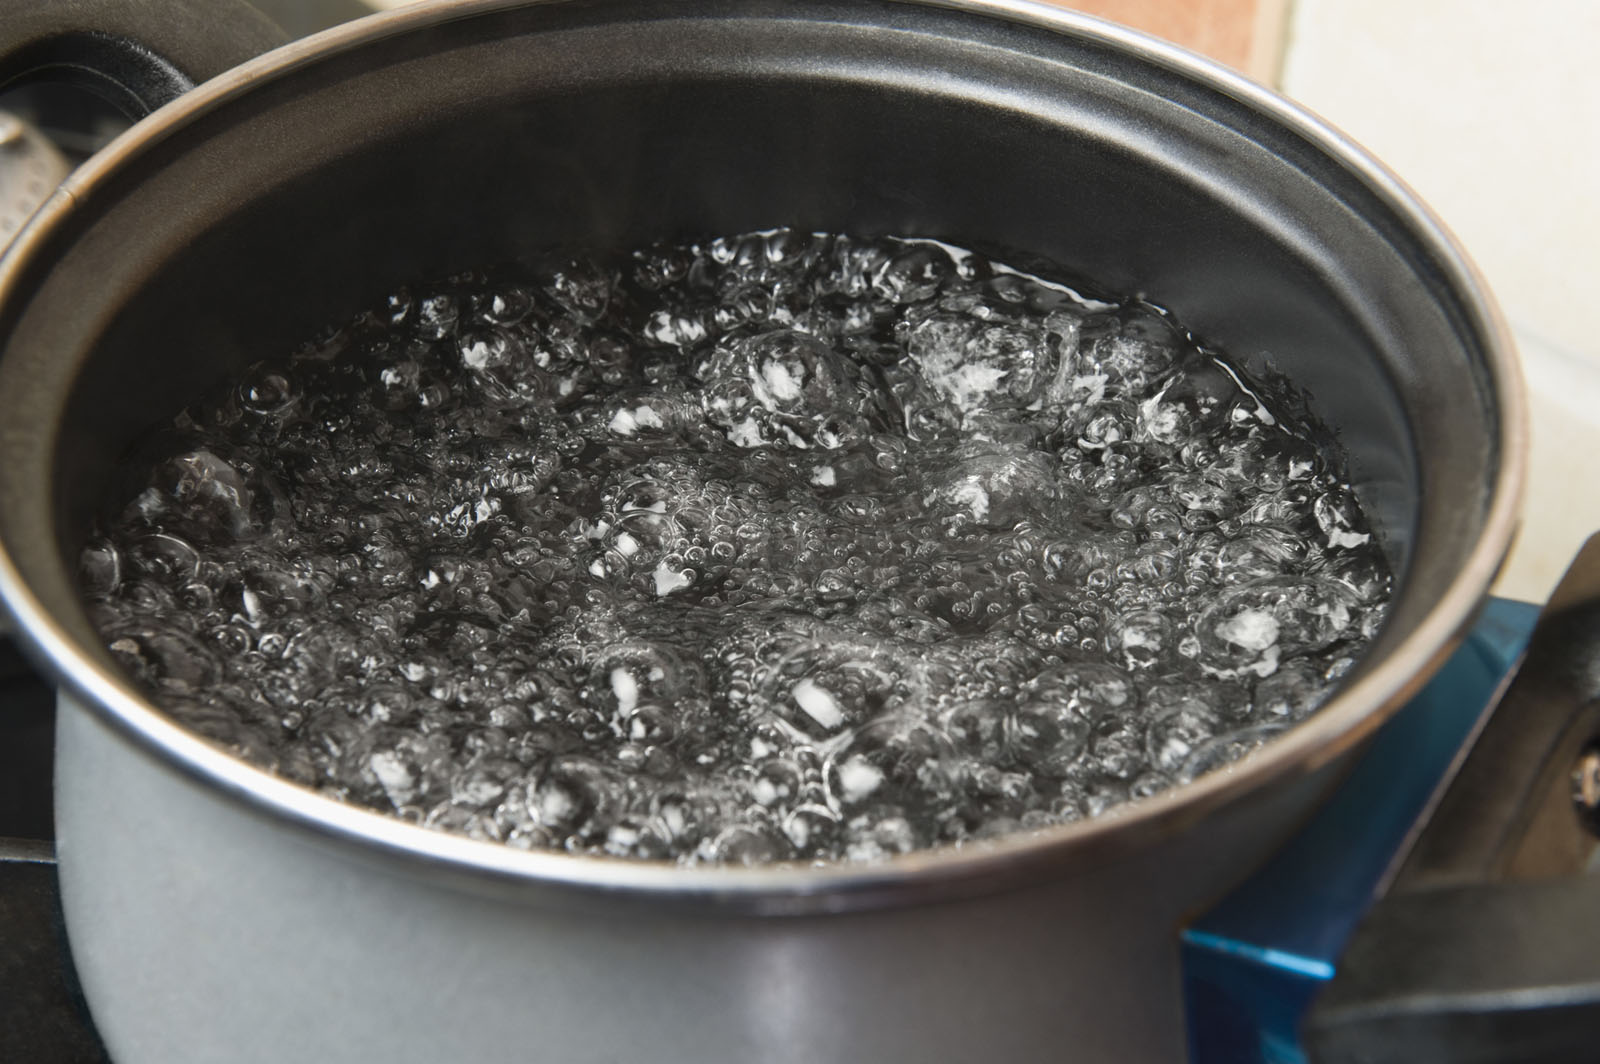 Southern Stafford County residents advised to boil water